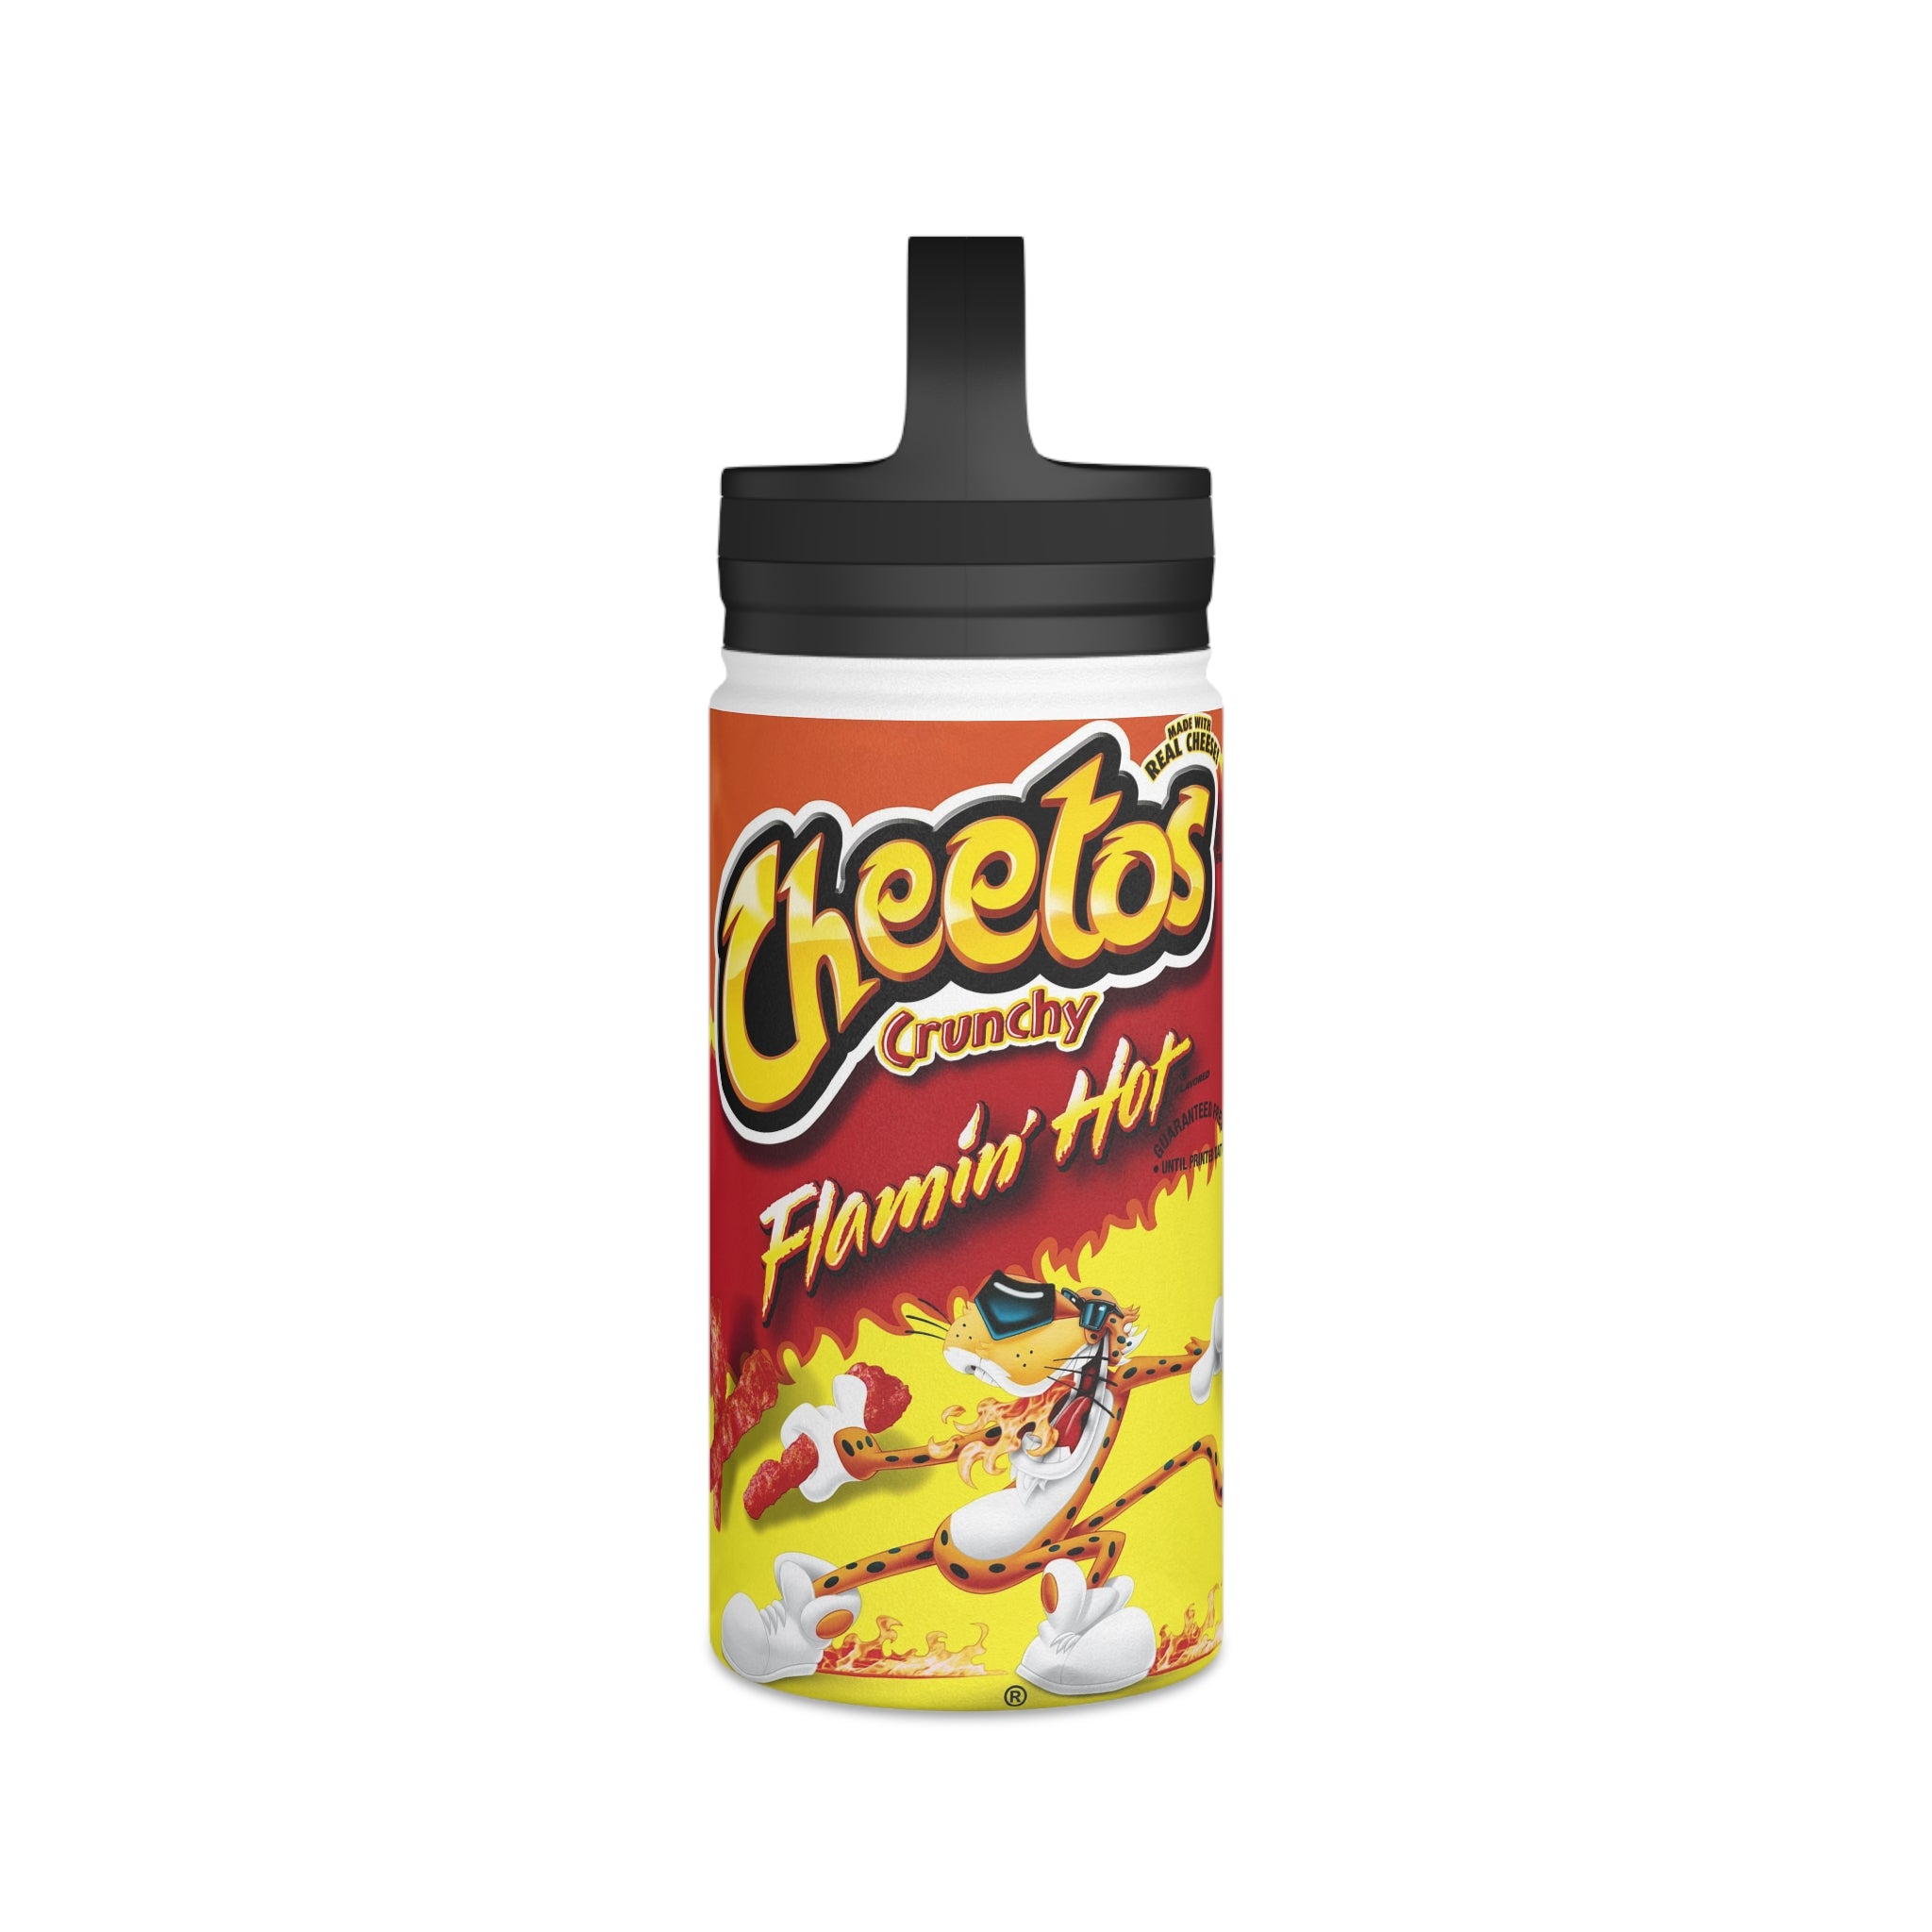 Cheetos Crunchy Flamin Hot Stainless Steel Water Bottle, Handle Lid